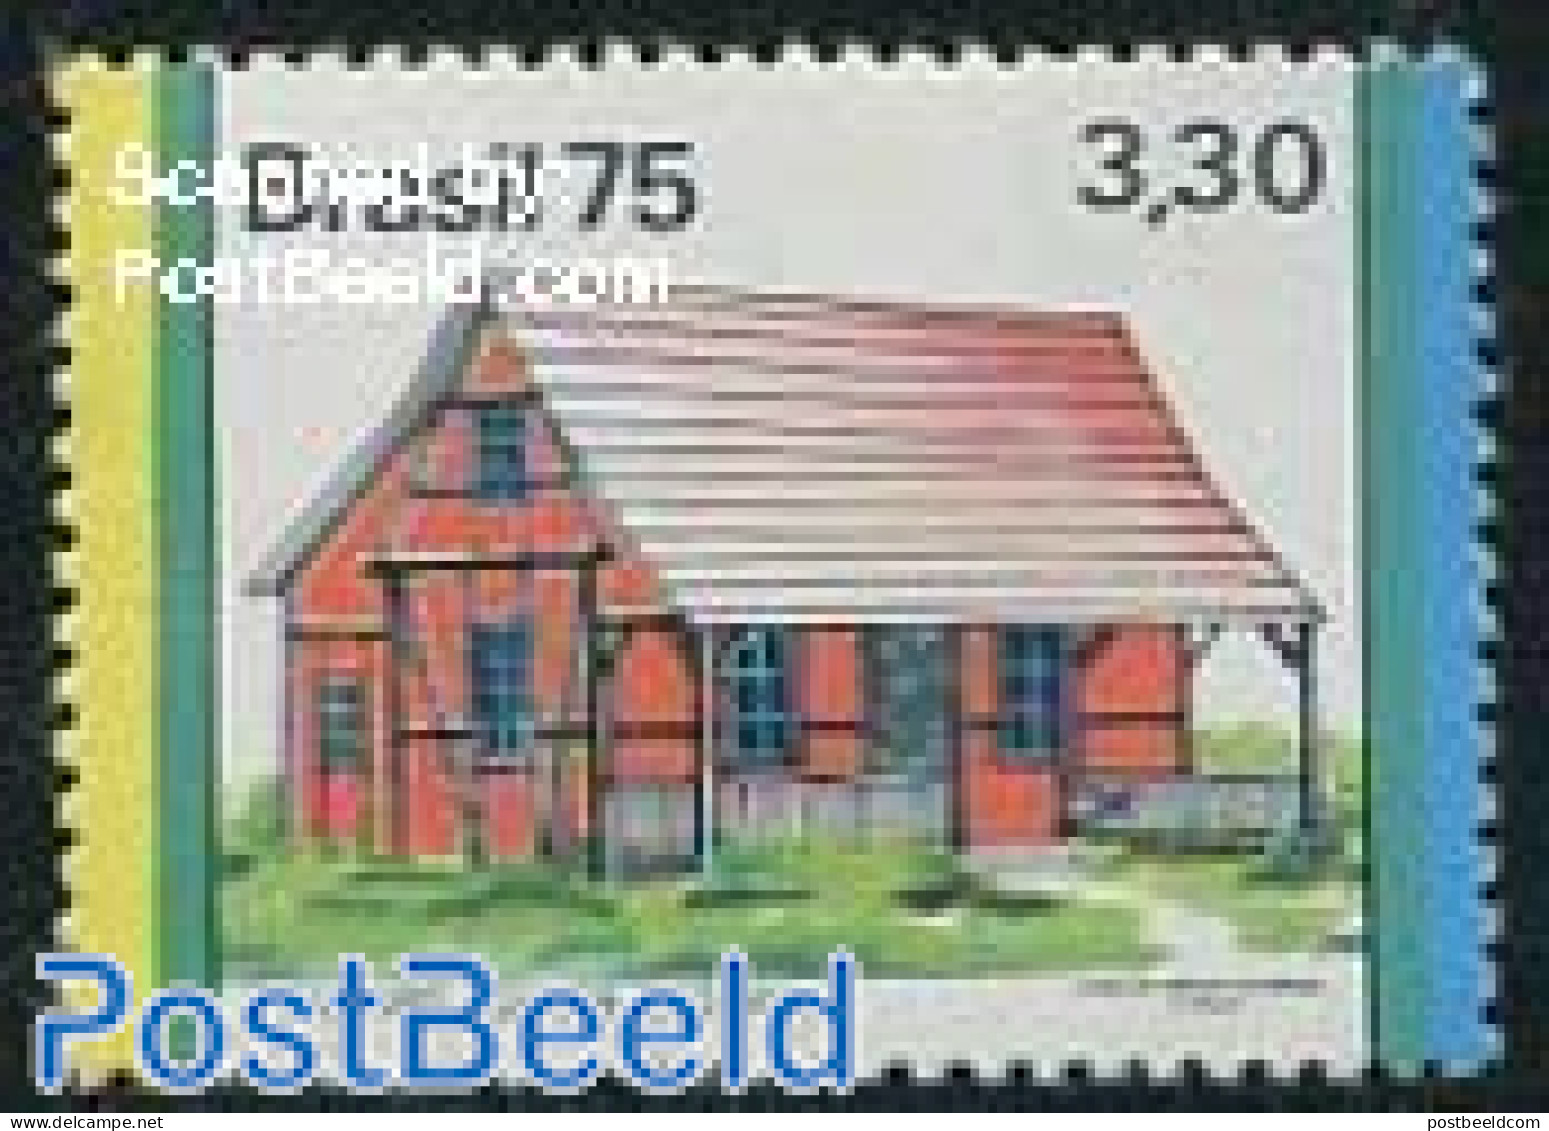 Brazil 1975 3.30Cr, Yellow Stripe Left, Stamp Out Of Set, Mint NH - Unused Stamps